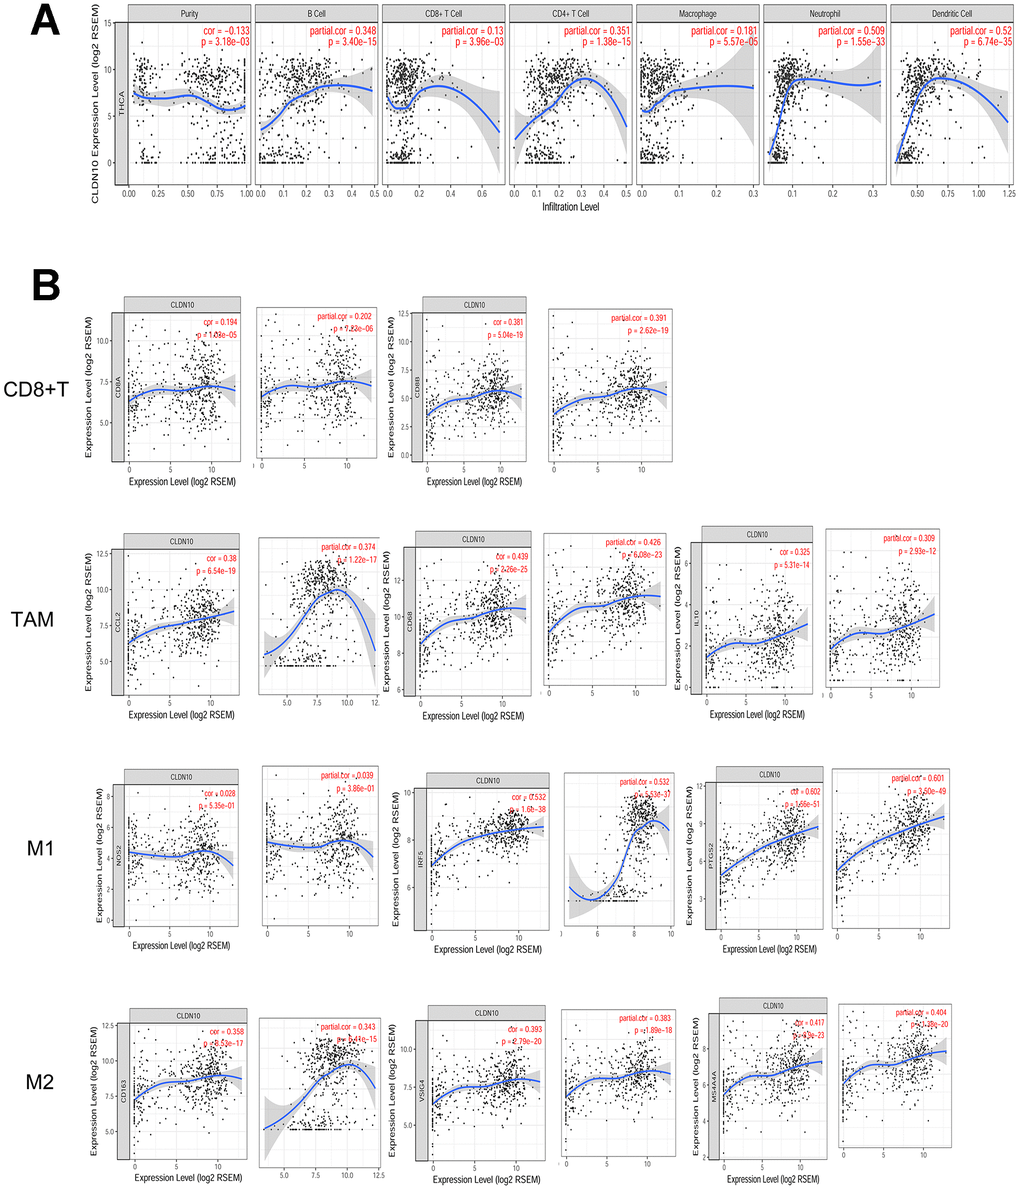 (A) Correlation of CLDN10 expression with tumor purity and immune cell infiltration levels in thyroid cancer. CLDN10 expression was negatively correlated with tumor purity (r=-0.133, PB) The CLDN10 expression was positively correlated with cell markers of CD8+T cell, Tumor-associated macrophage (TAM), M1 macrophage, and M2 macrophage, respectively.